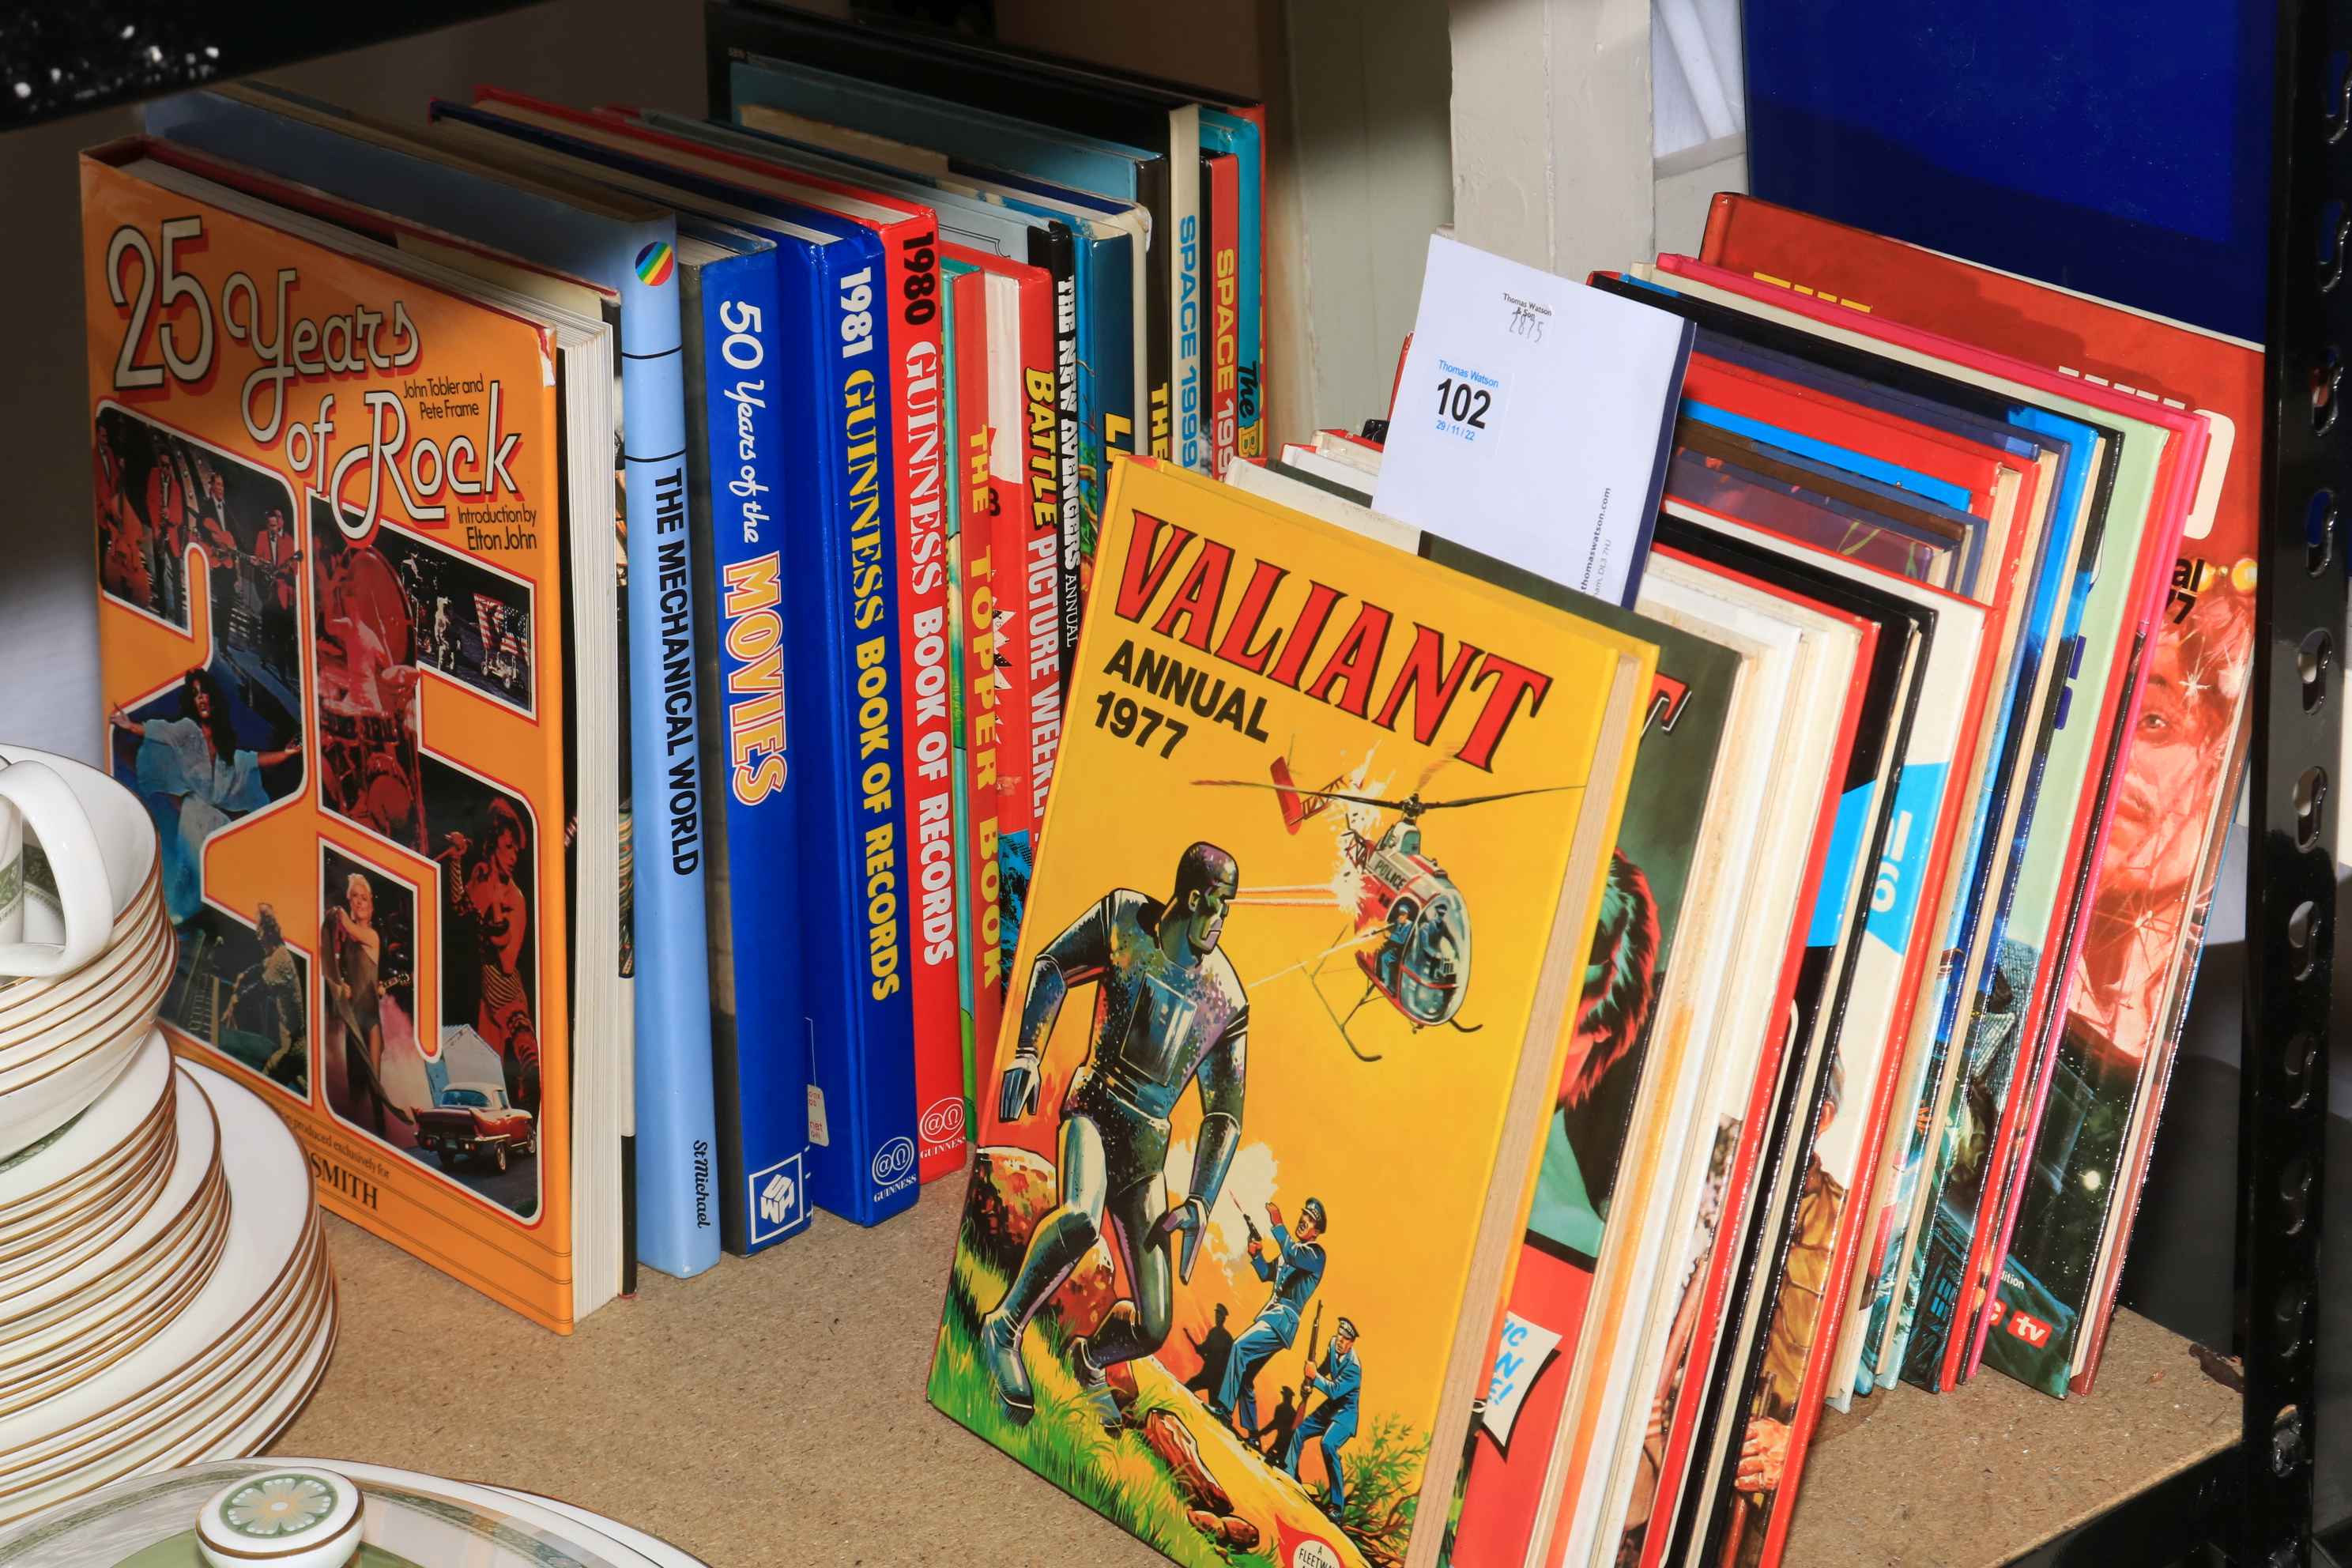 Collection of children's annuals including Dr Who, Valiant, Dad's Army, etc.